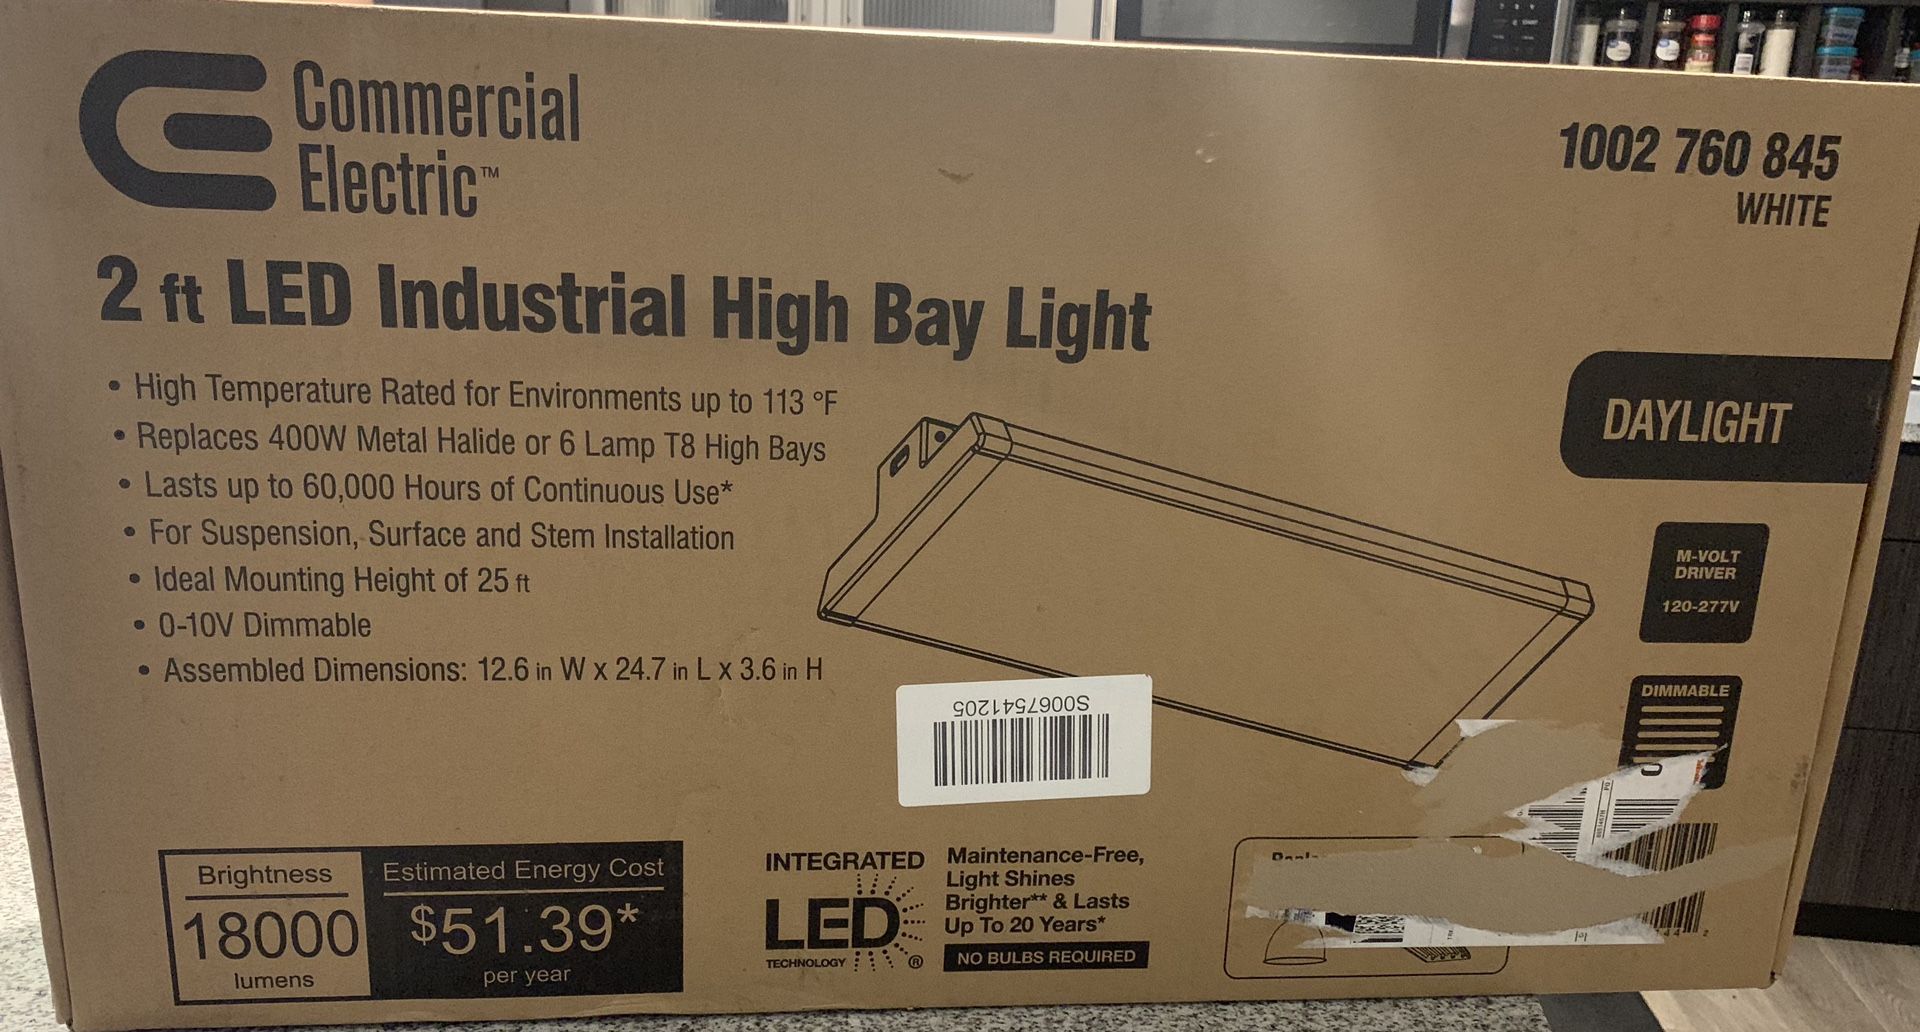 Commercial Electric LED Industrial High Bay Light